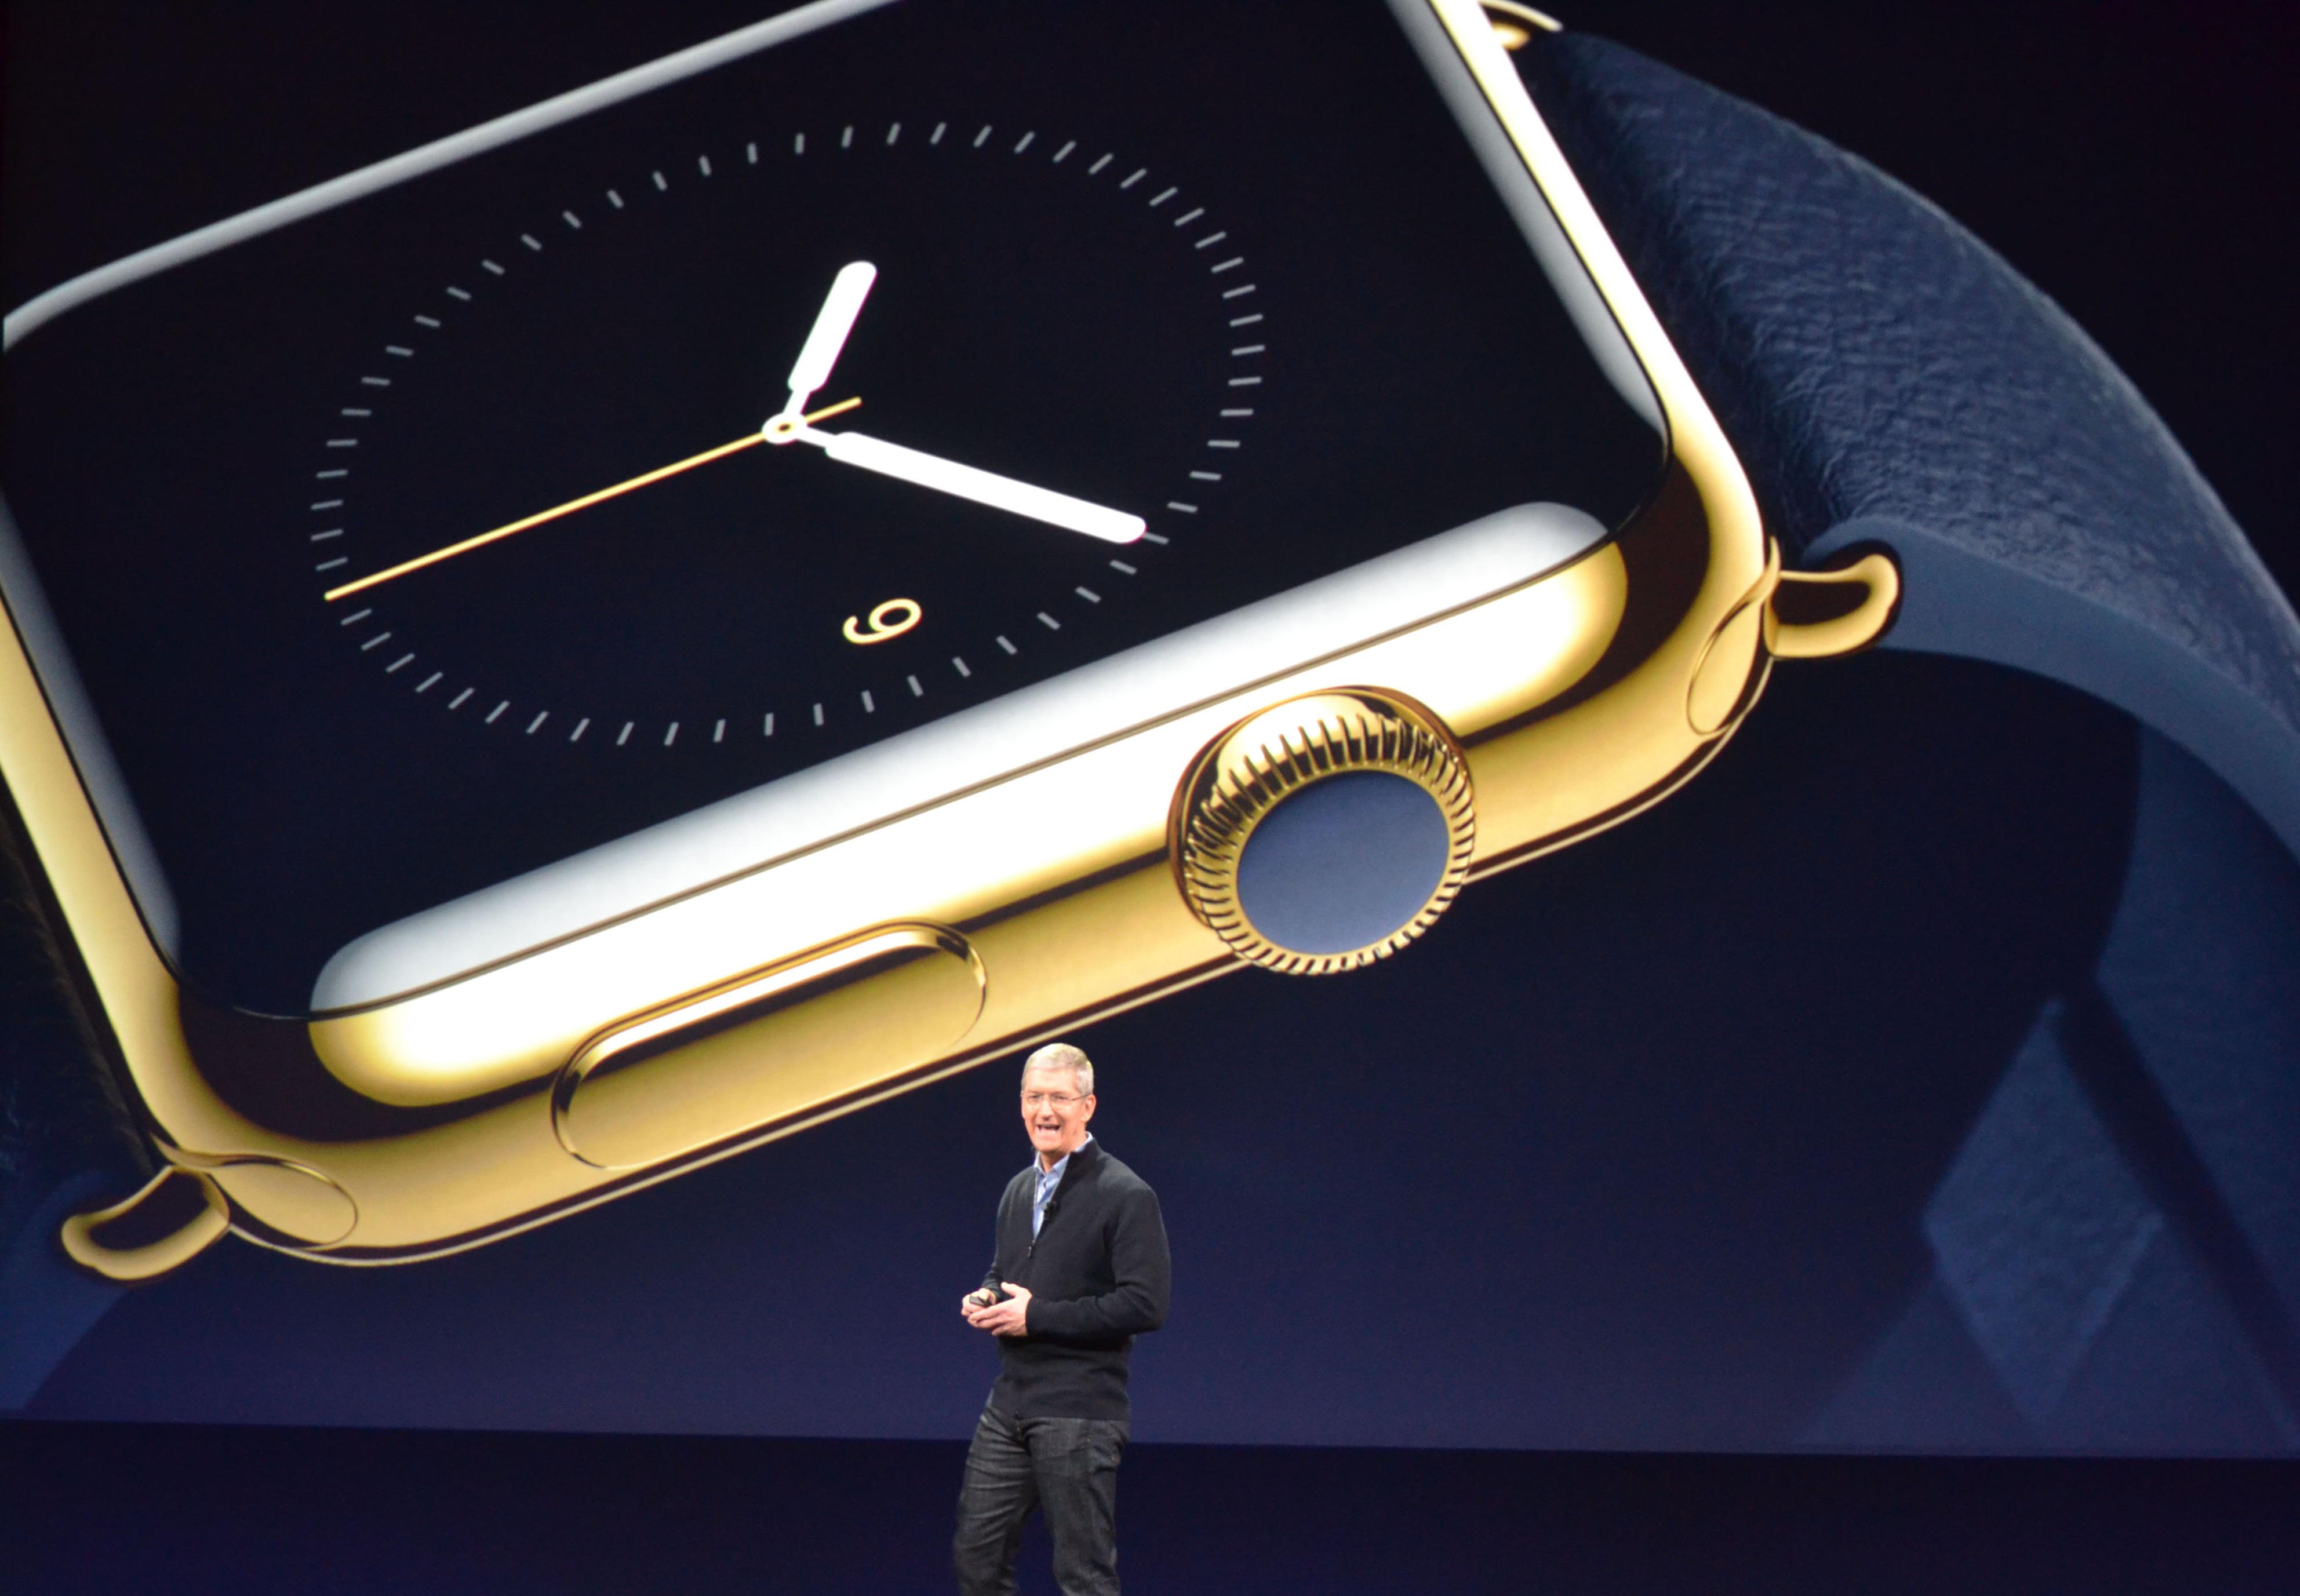 Apple CEO Tim Cook unveils details of the Apple Watch during an event in San Francisco on March 9, 2015. Photo: Kyodo